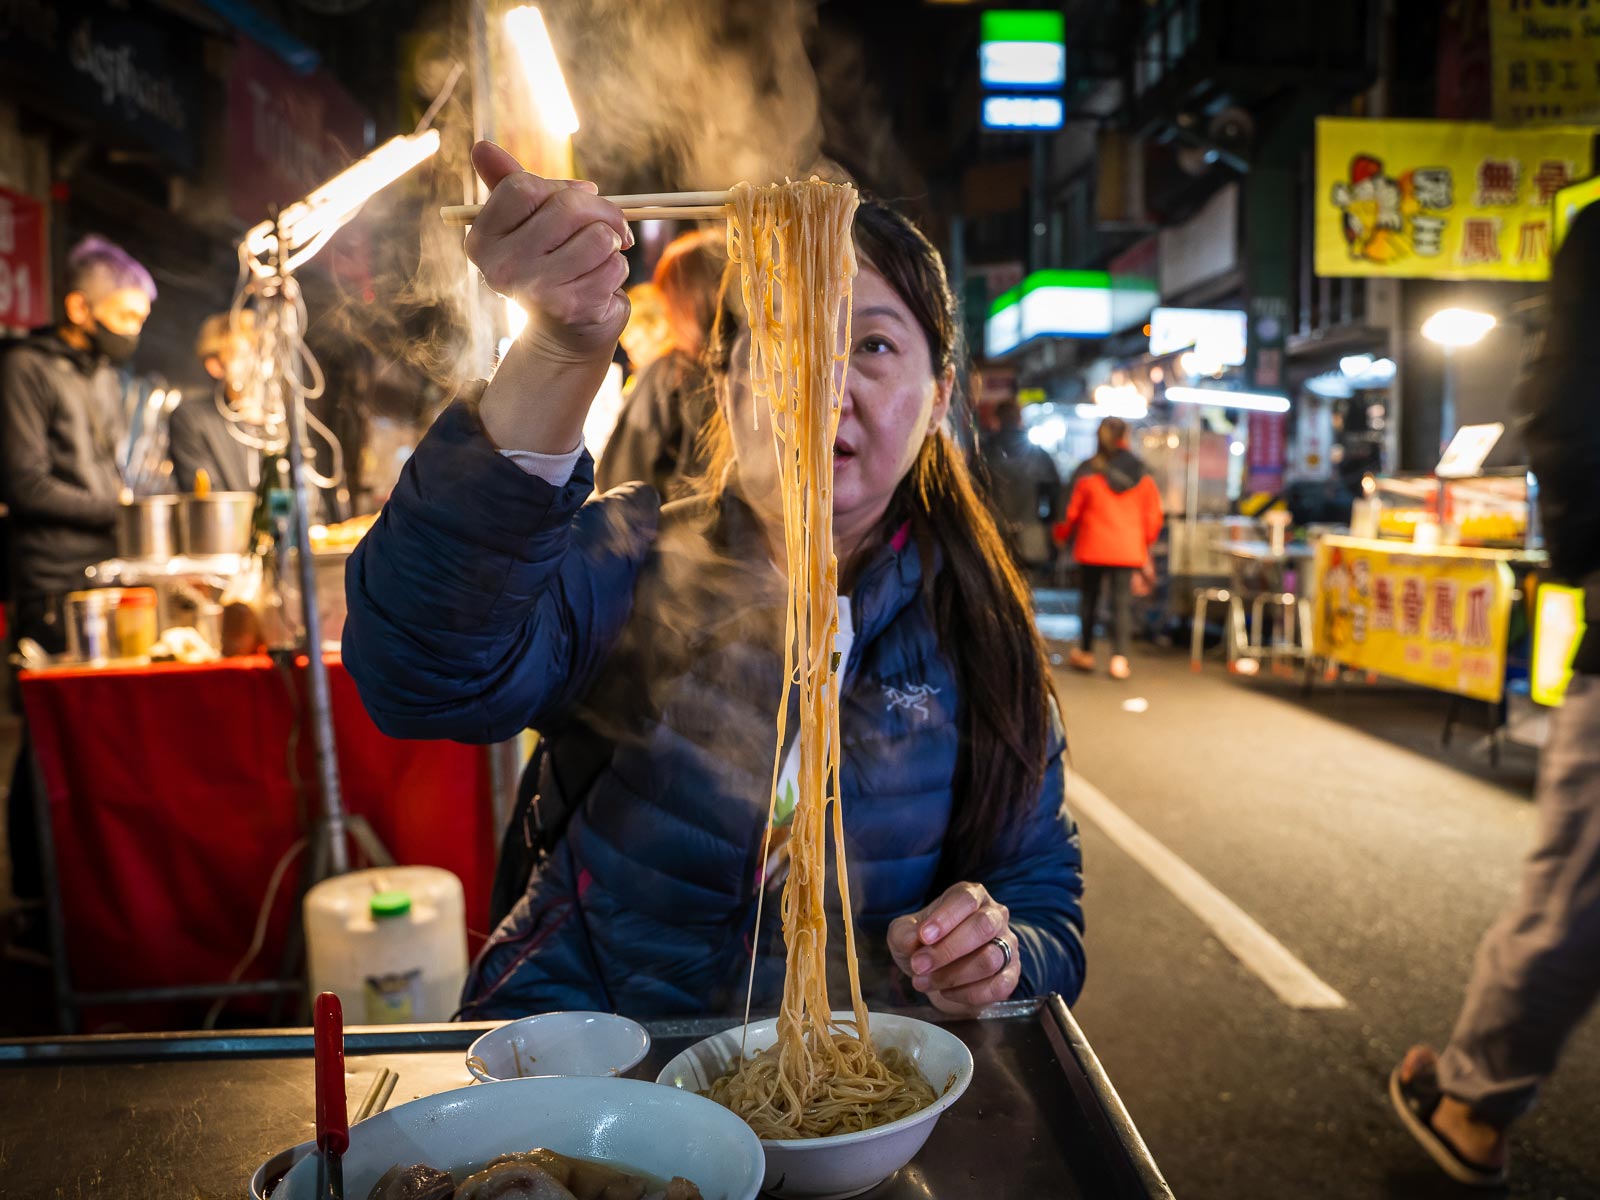 A tourist eats a bowl of noodles on the street in Keelung Night Market.